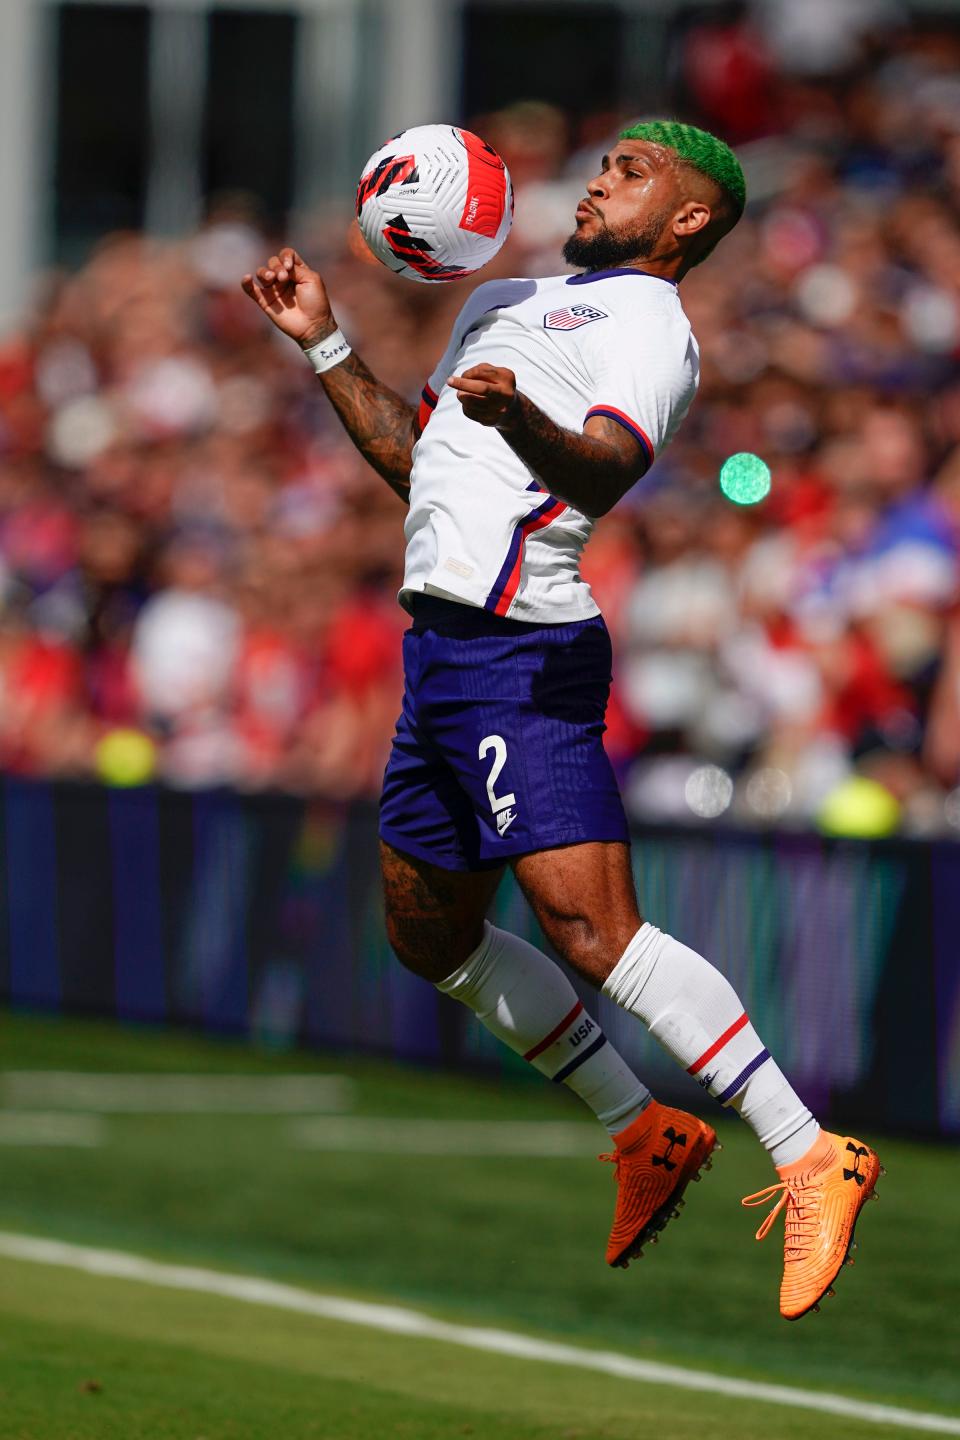 DeAndre Yedlin is the only player on the current U.S. roster who has been to a World Cup.